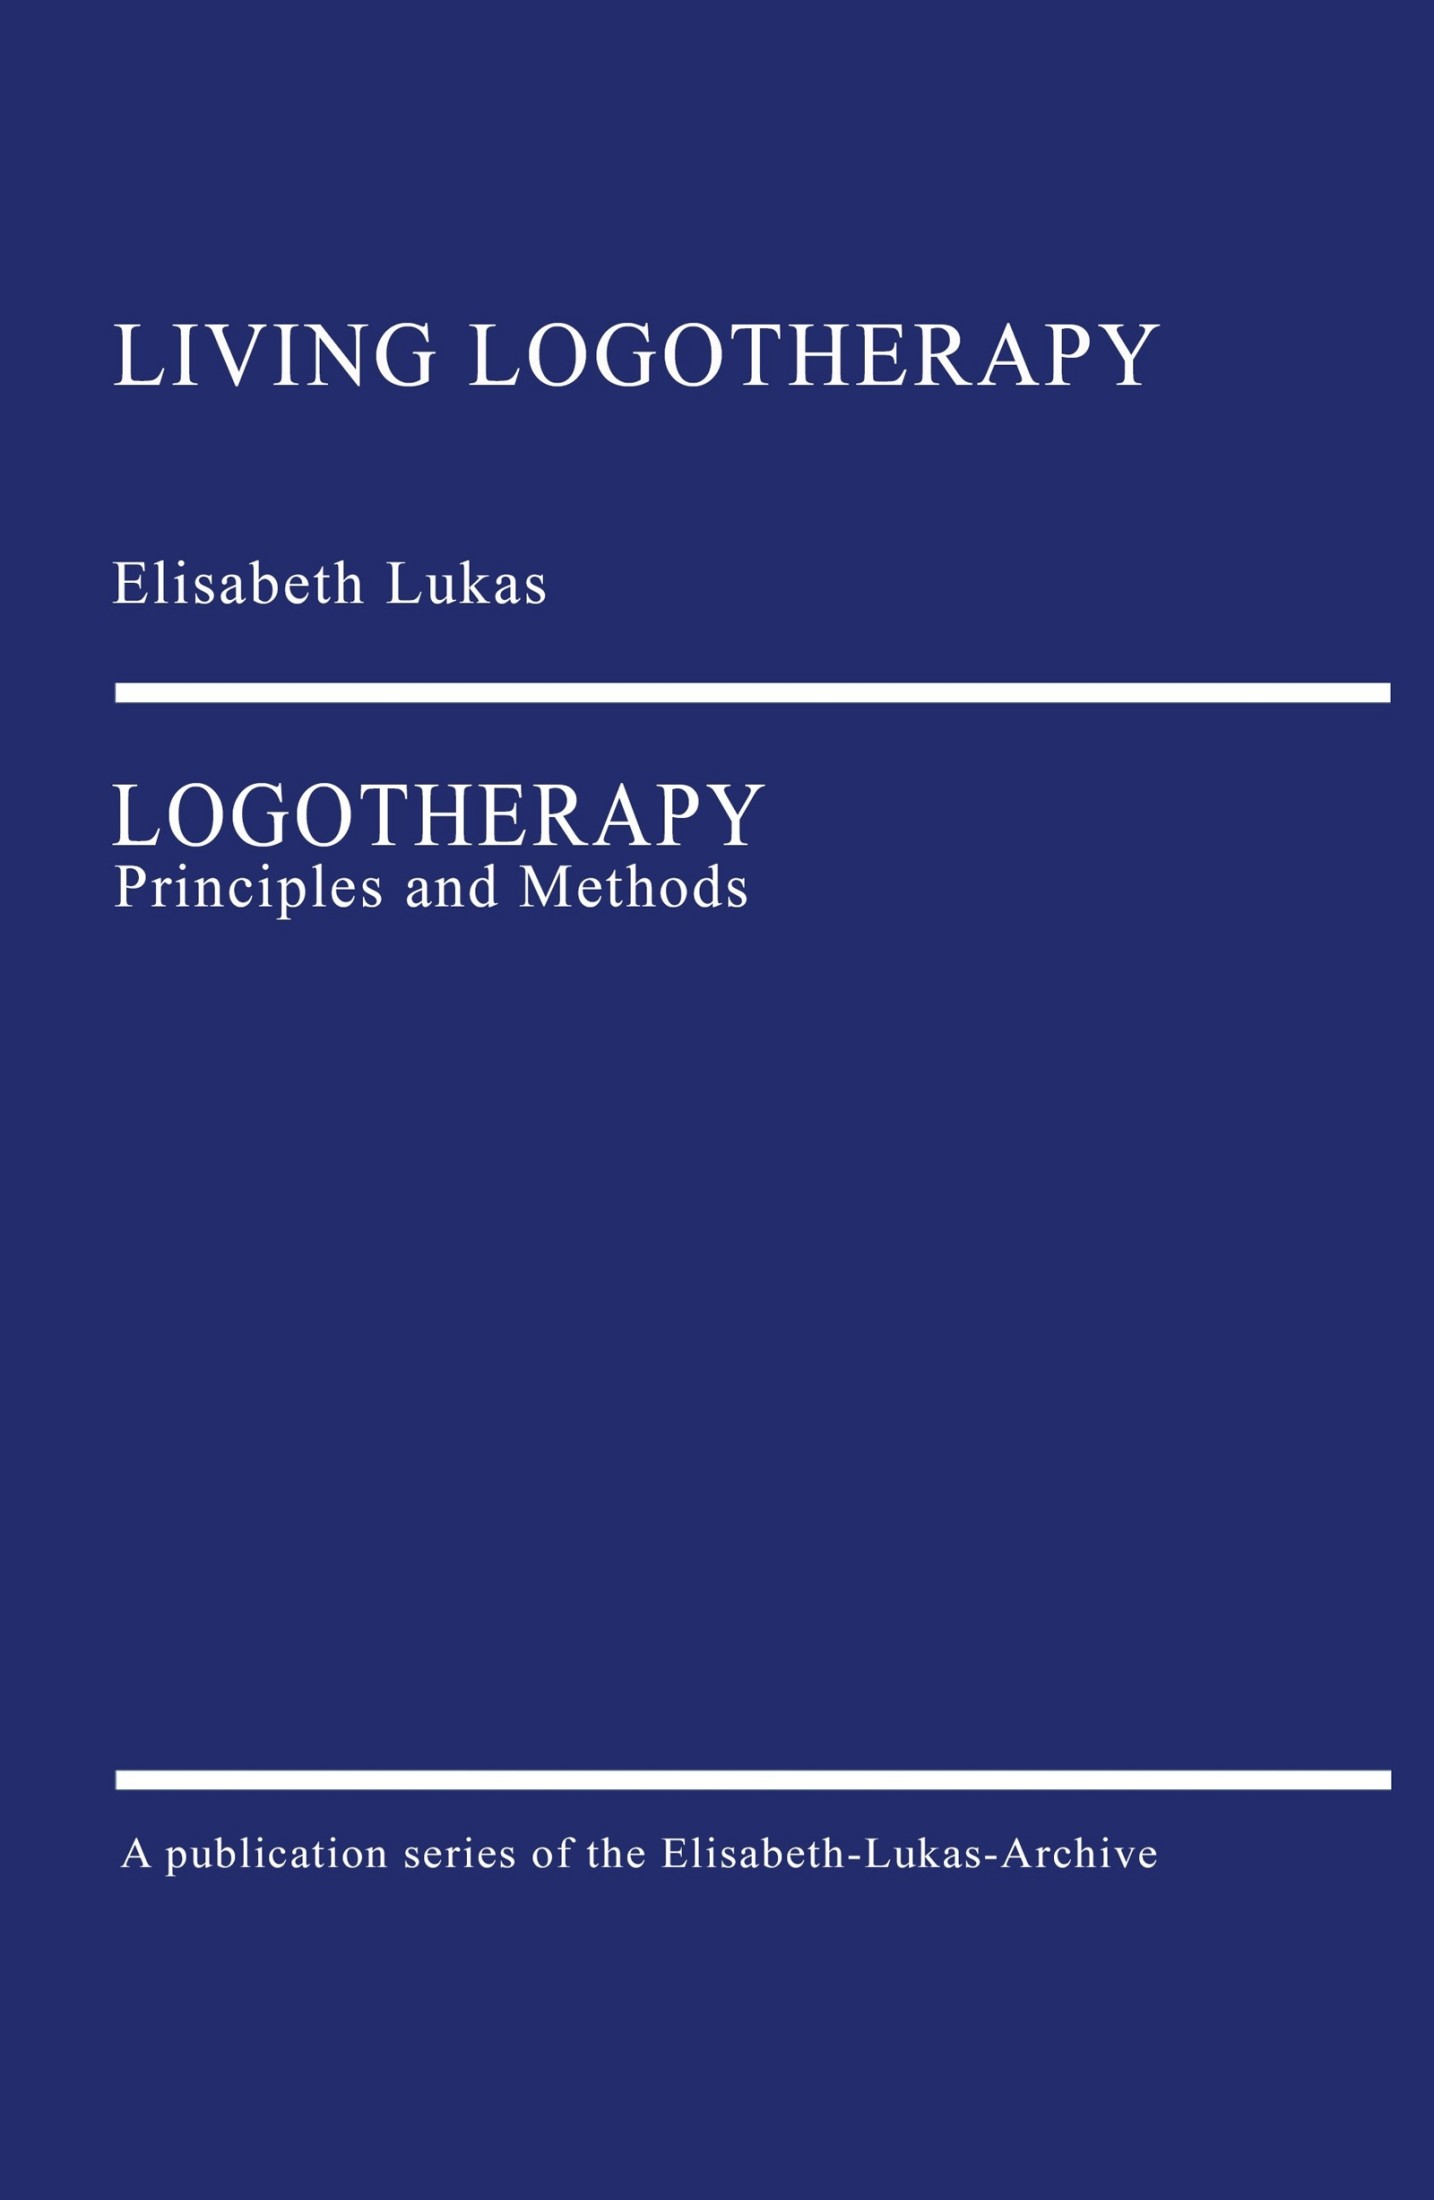 Living Logotherapy - image 1